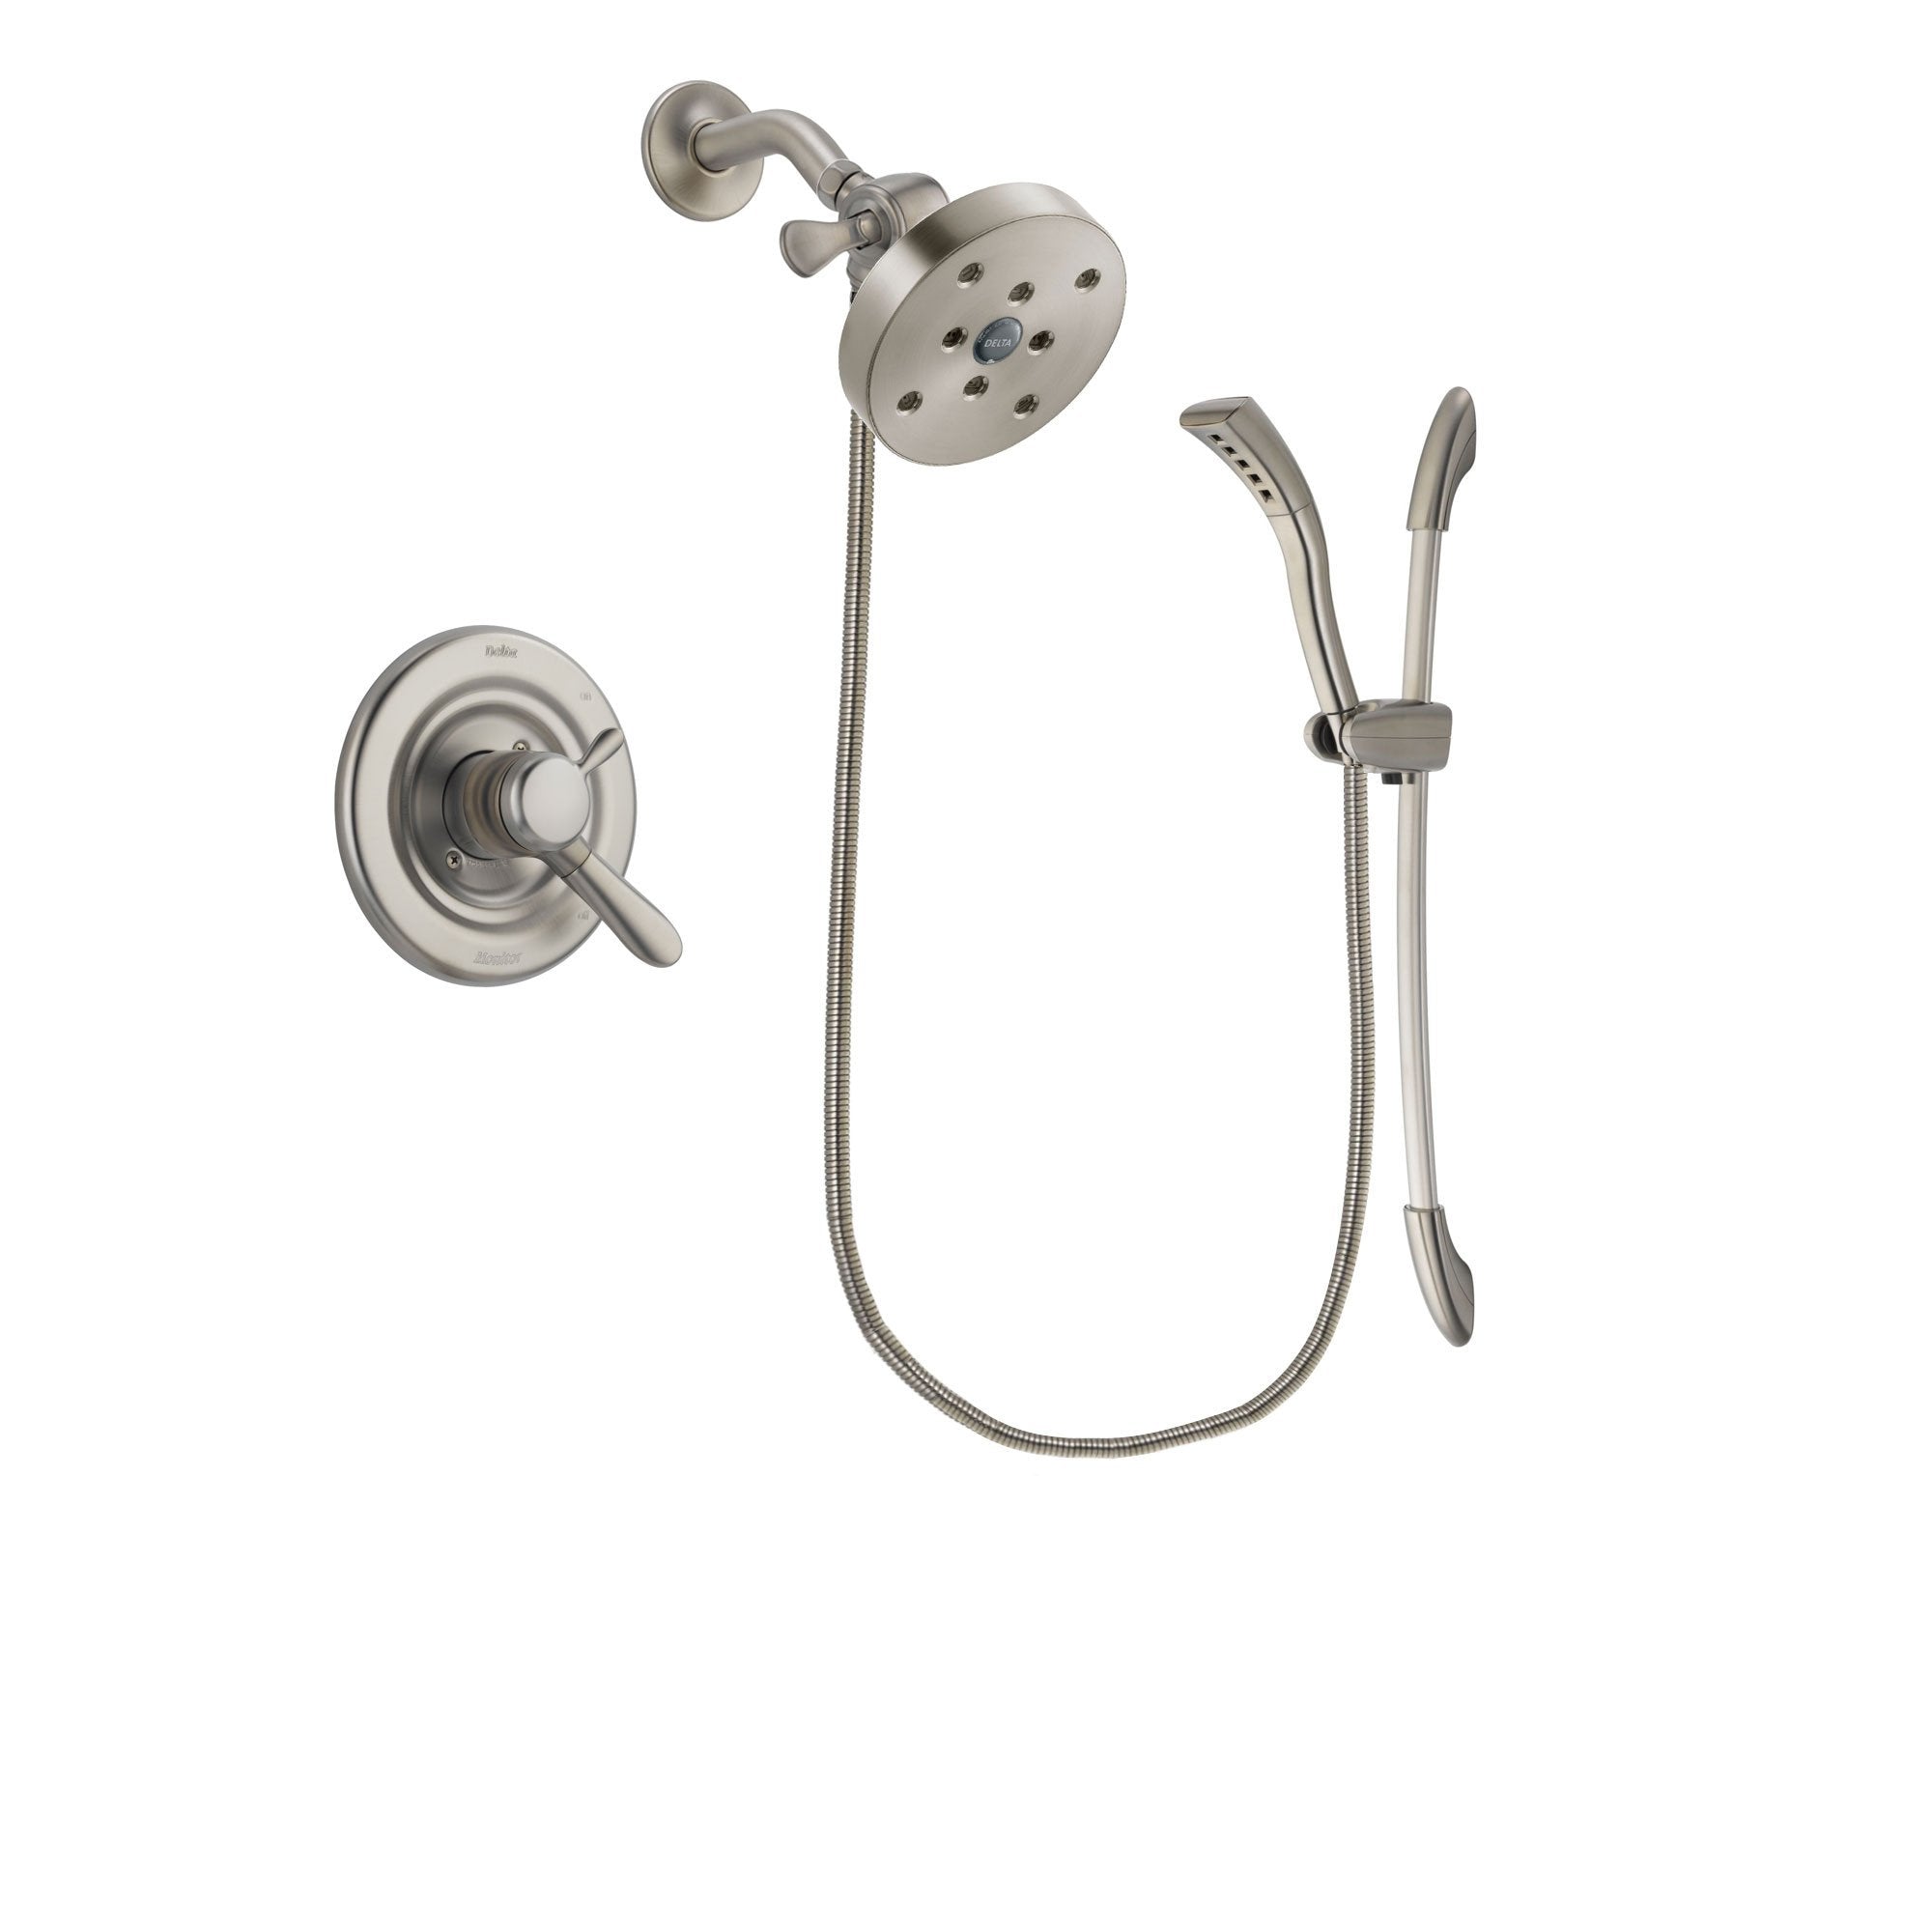 Delta Lahara Stainless Steel Finish Dual Control Shower Faucet System Package with 5-1/2 inch Shower Head and Handshower with Slide Bar Includes Rough-in Valve DSP1500V